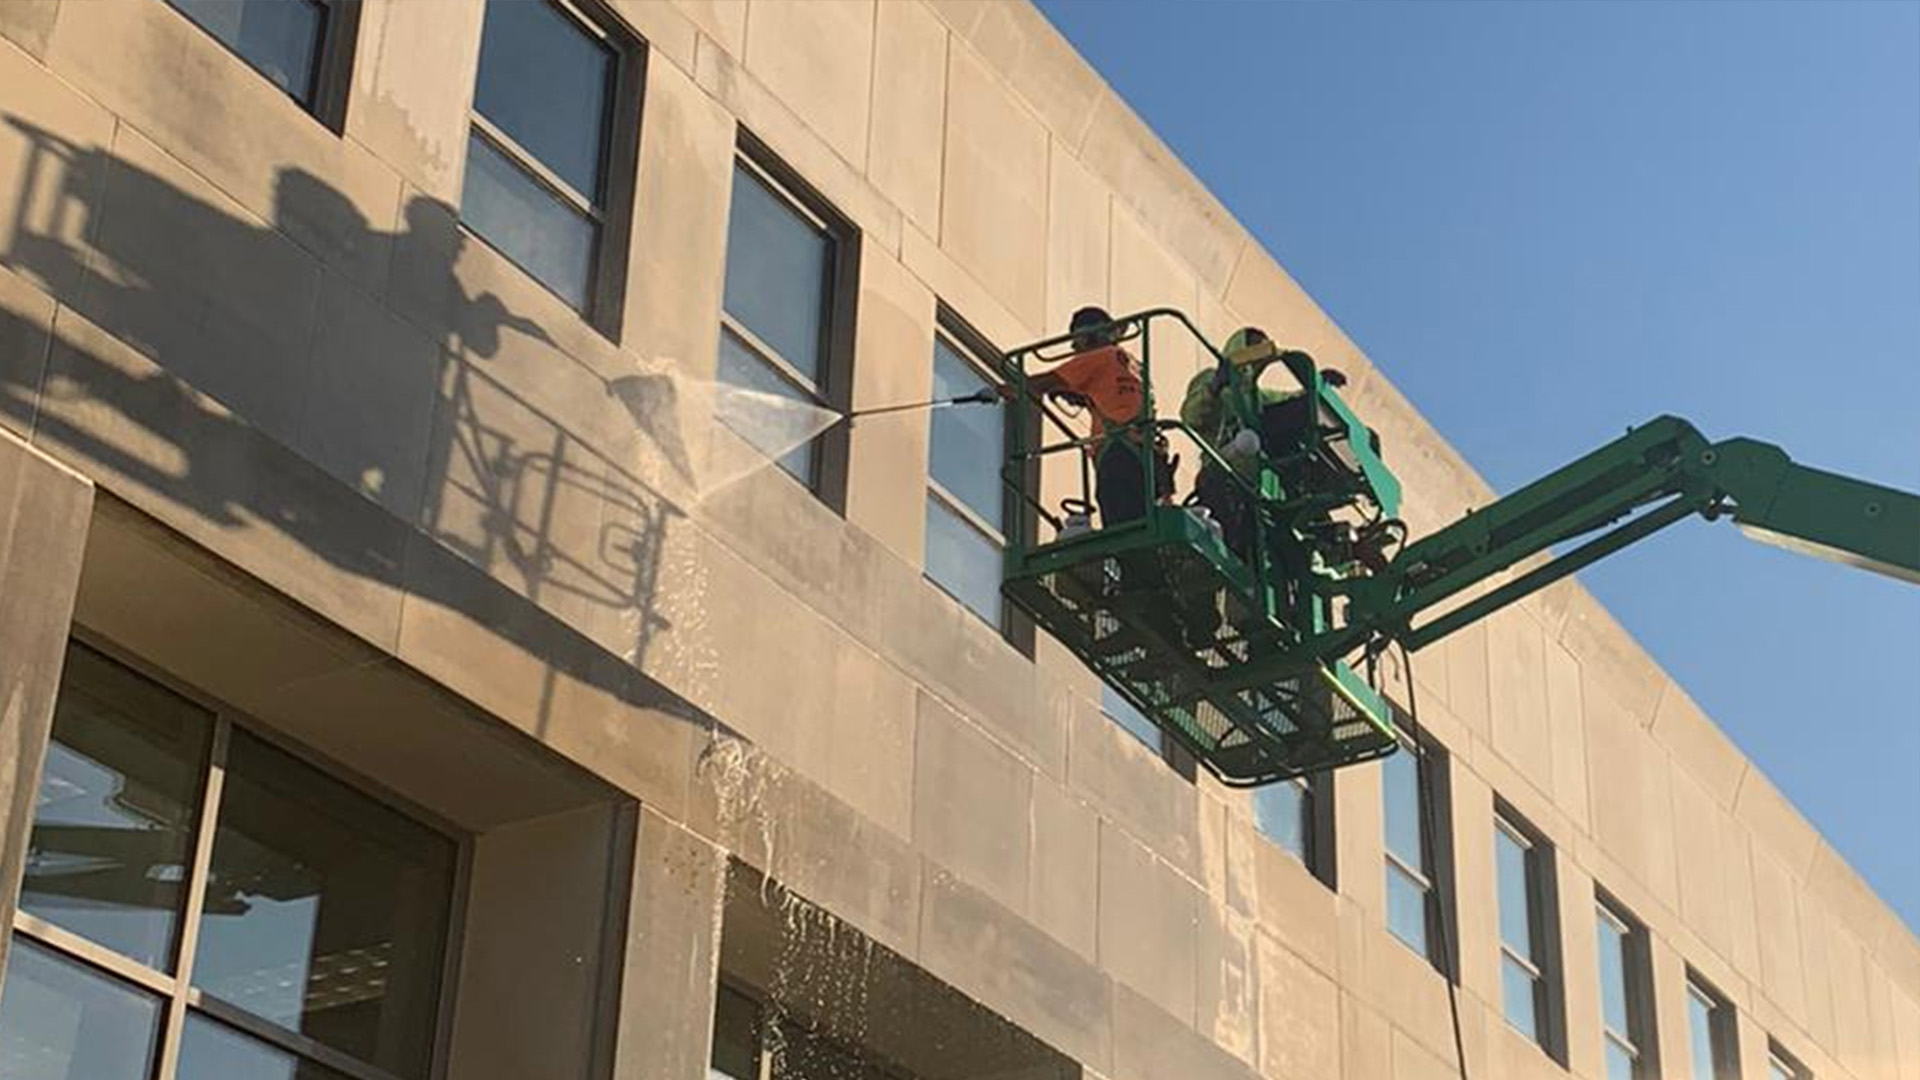 commercial roof cleaning,commercial roof,roof cleaning service,commercial roof cleaning service